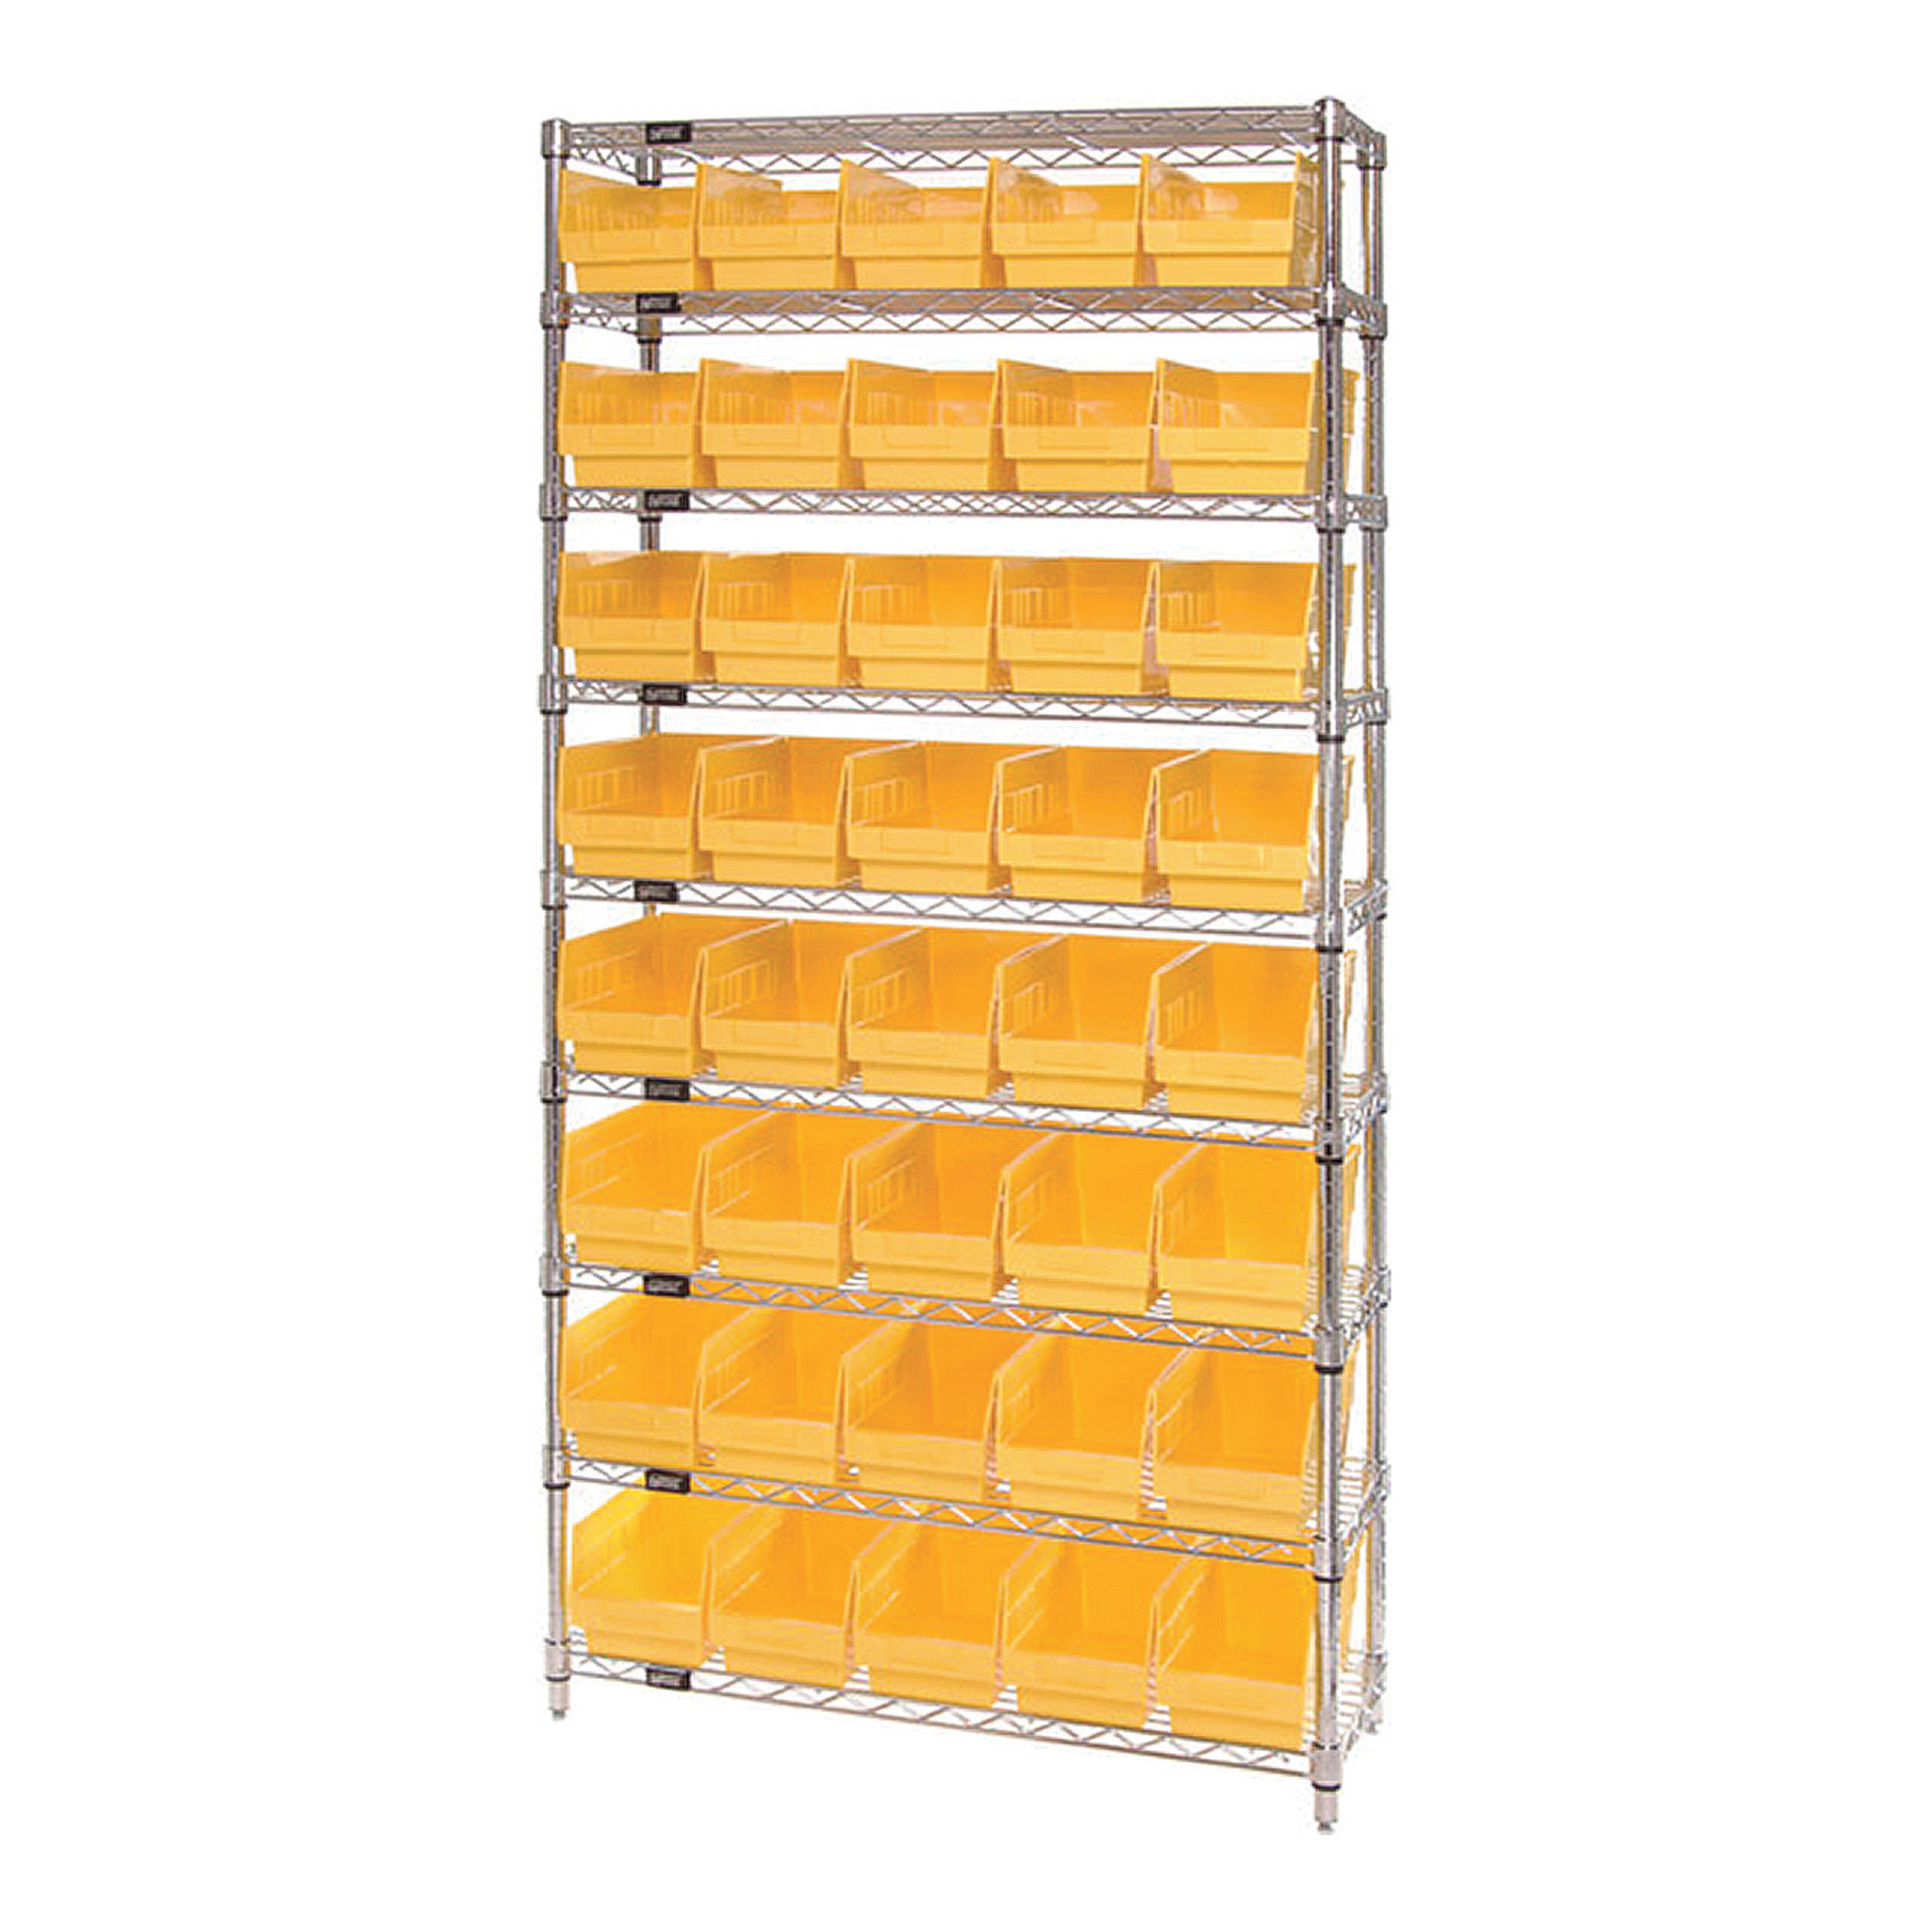 Storage Single Side Wire Chrome Shelving Unit with 40 Bins — 36Inch W x 18Inch D x 74Inch H, Yellow, Model - Quantum WR9-204YL